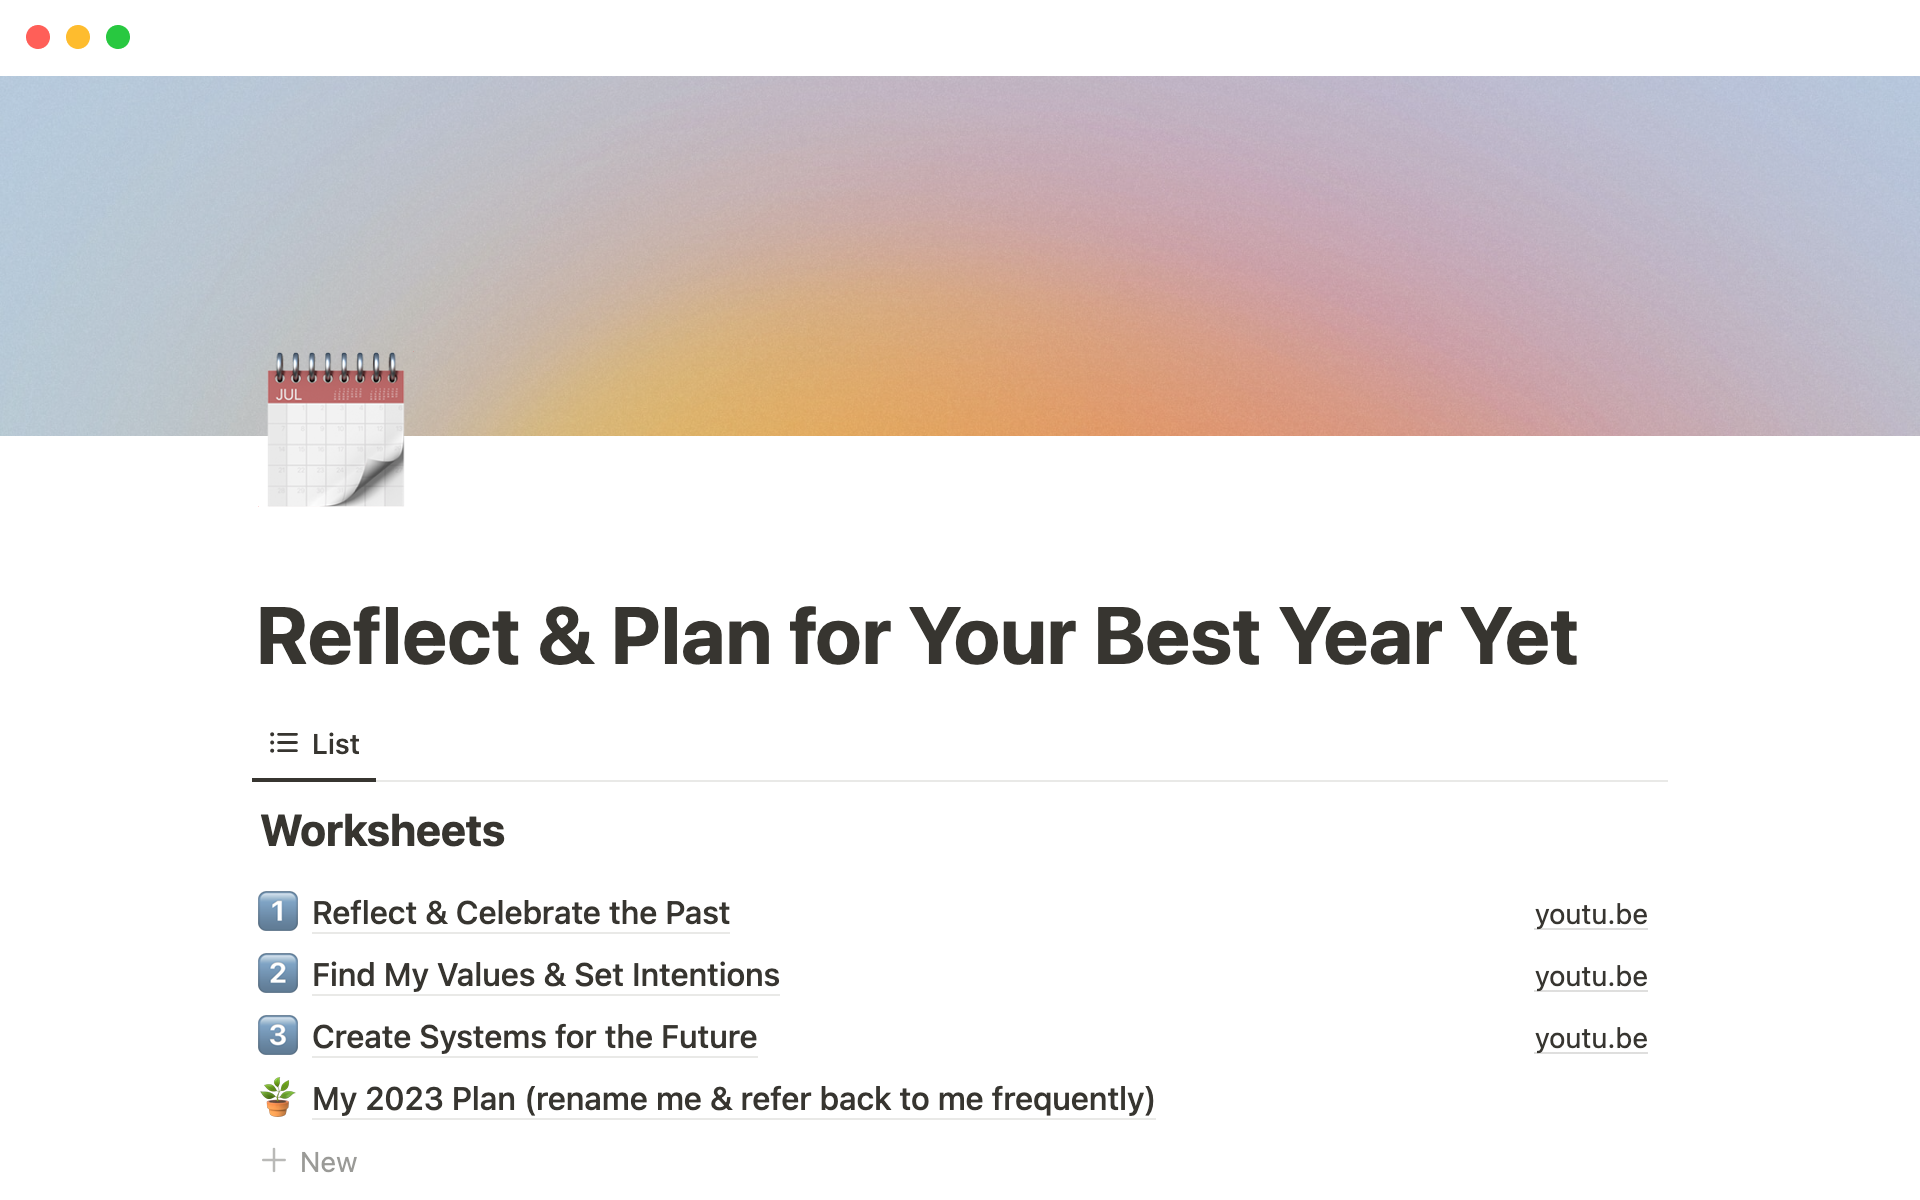 Reflect & plan for your best year yetのテンプレートのプレビュー